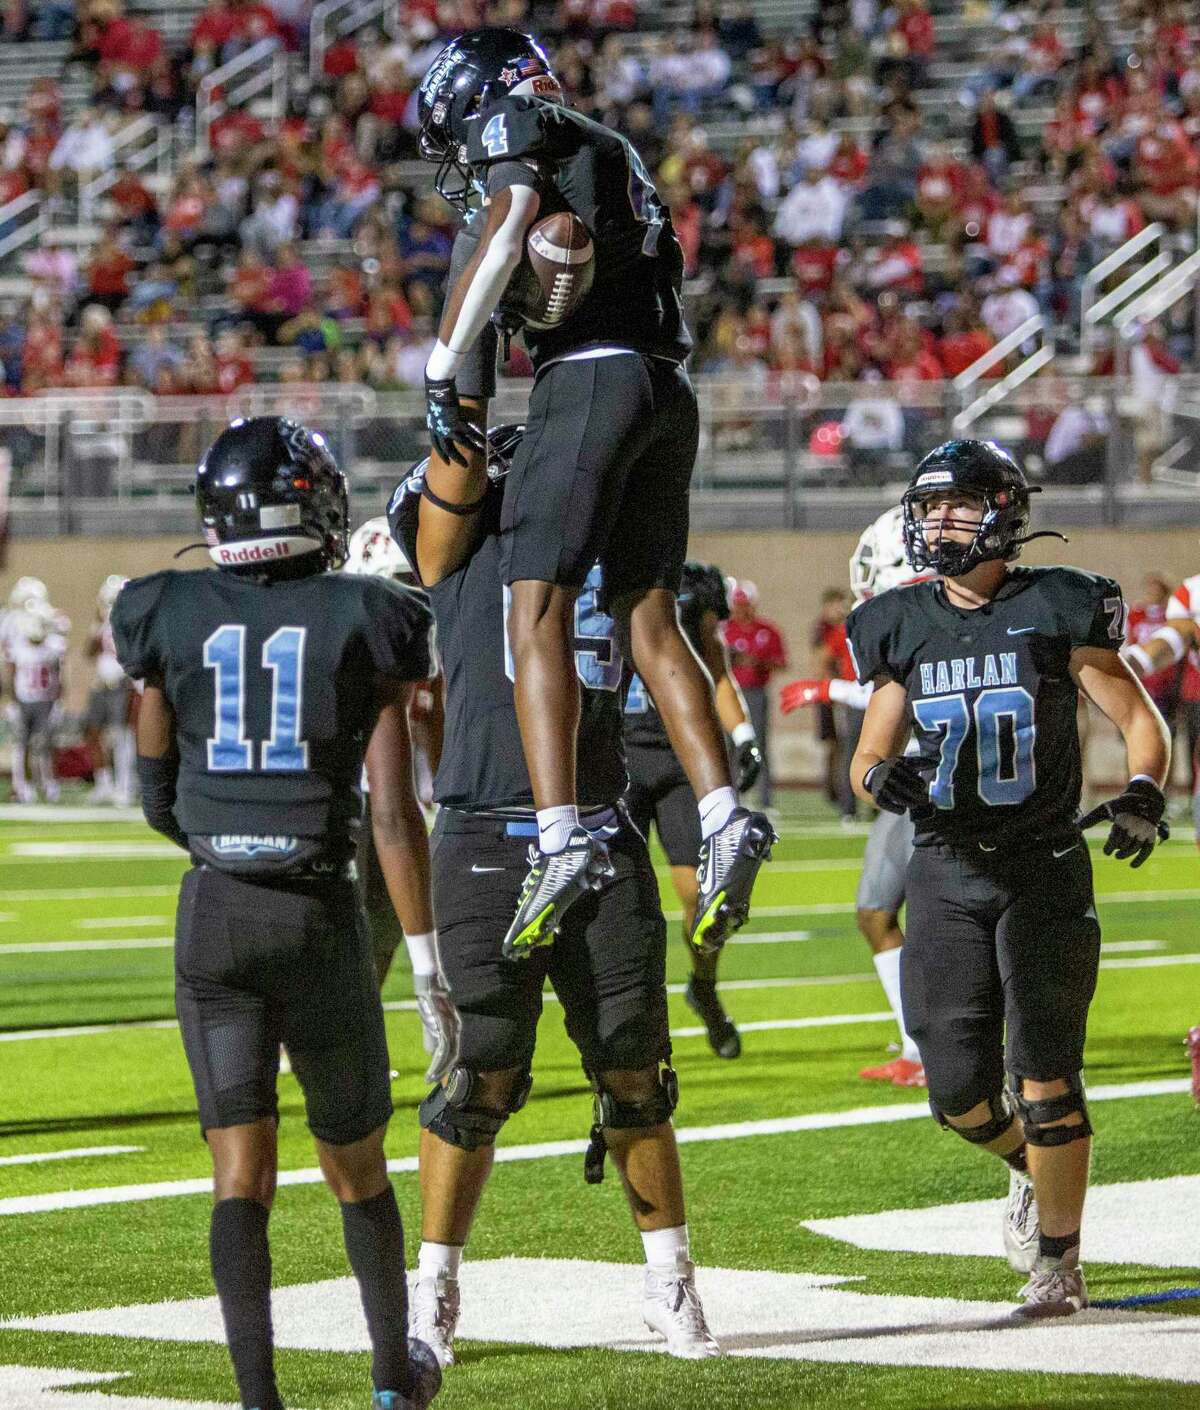 Harlan’s Payton Matthews is lifted into the air Thursday night Nov. 3, 2022 at Farris Stadium after scoring a touchdown during the first half of the Hawks’ game against the Taft Raiders.